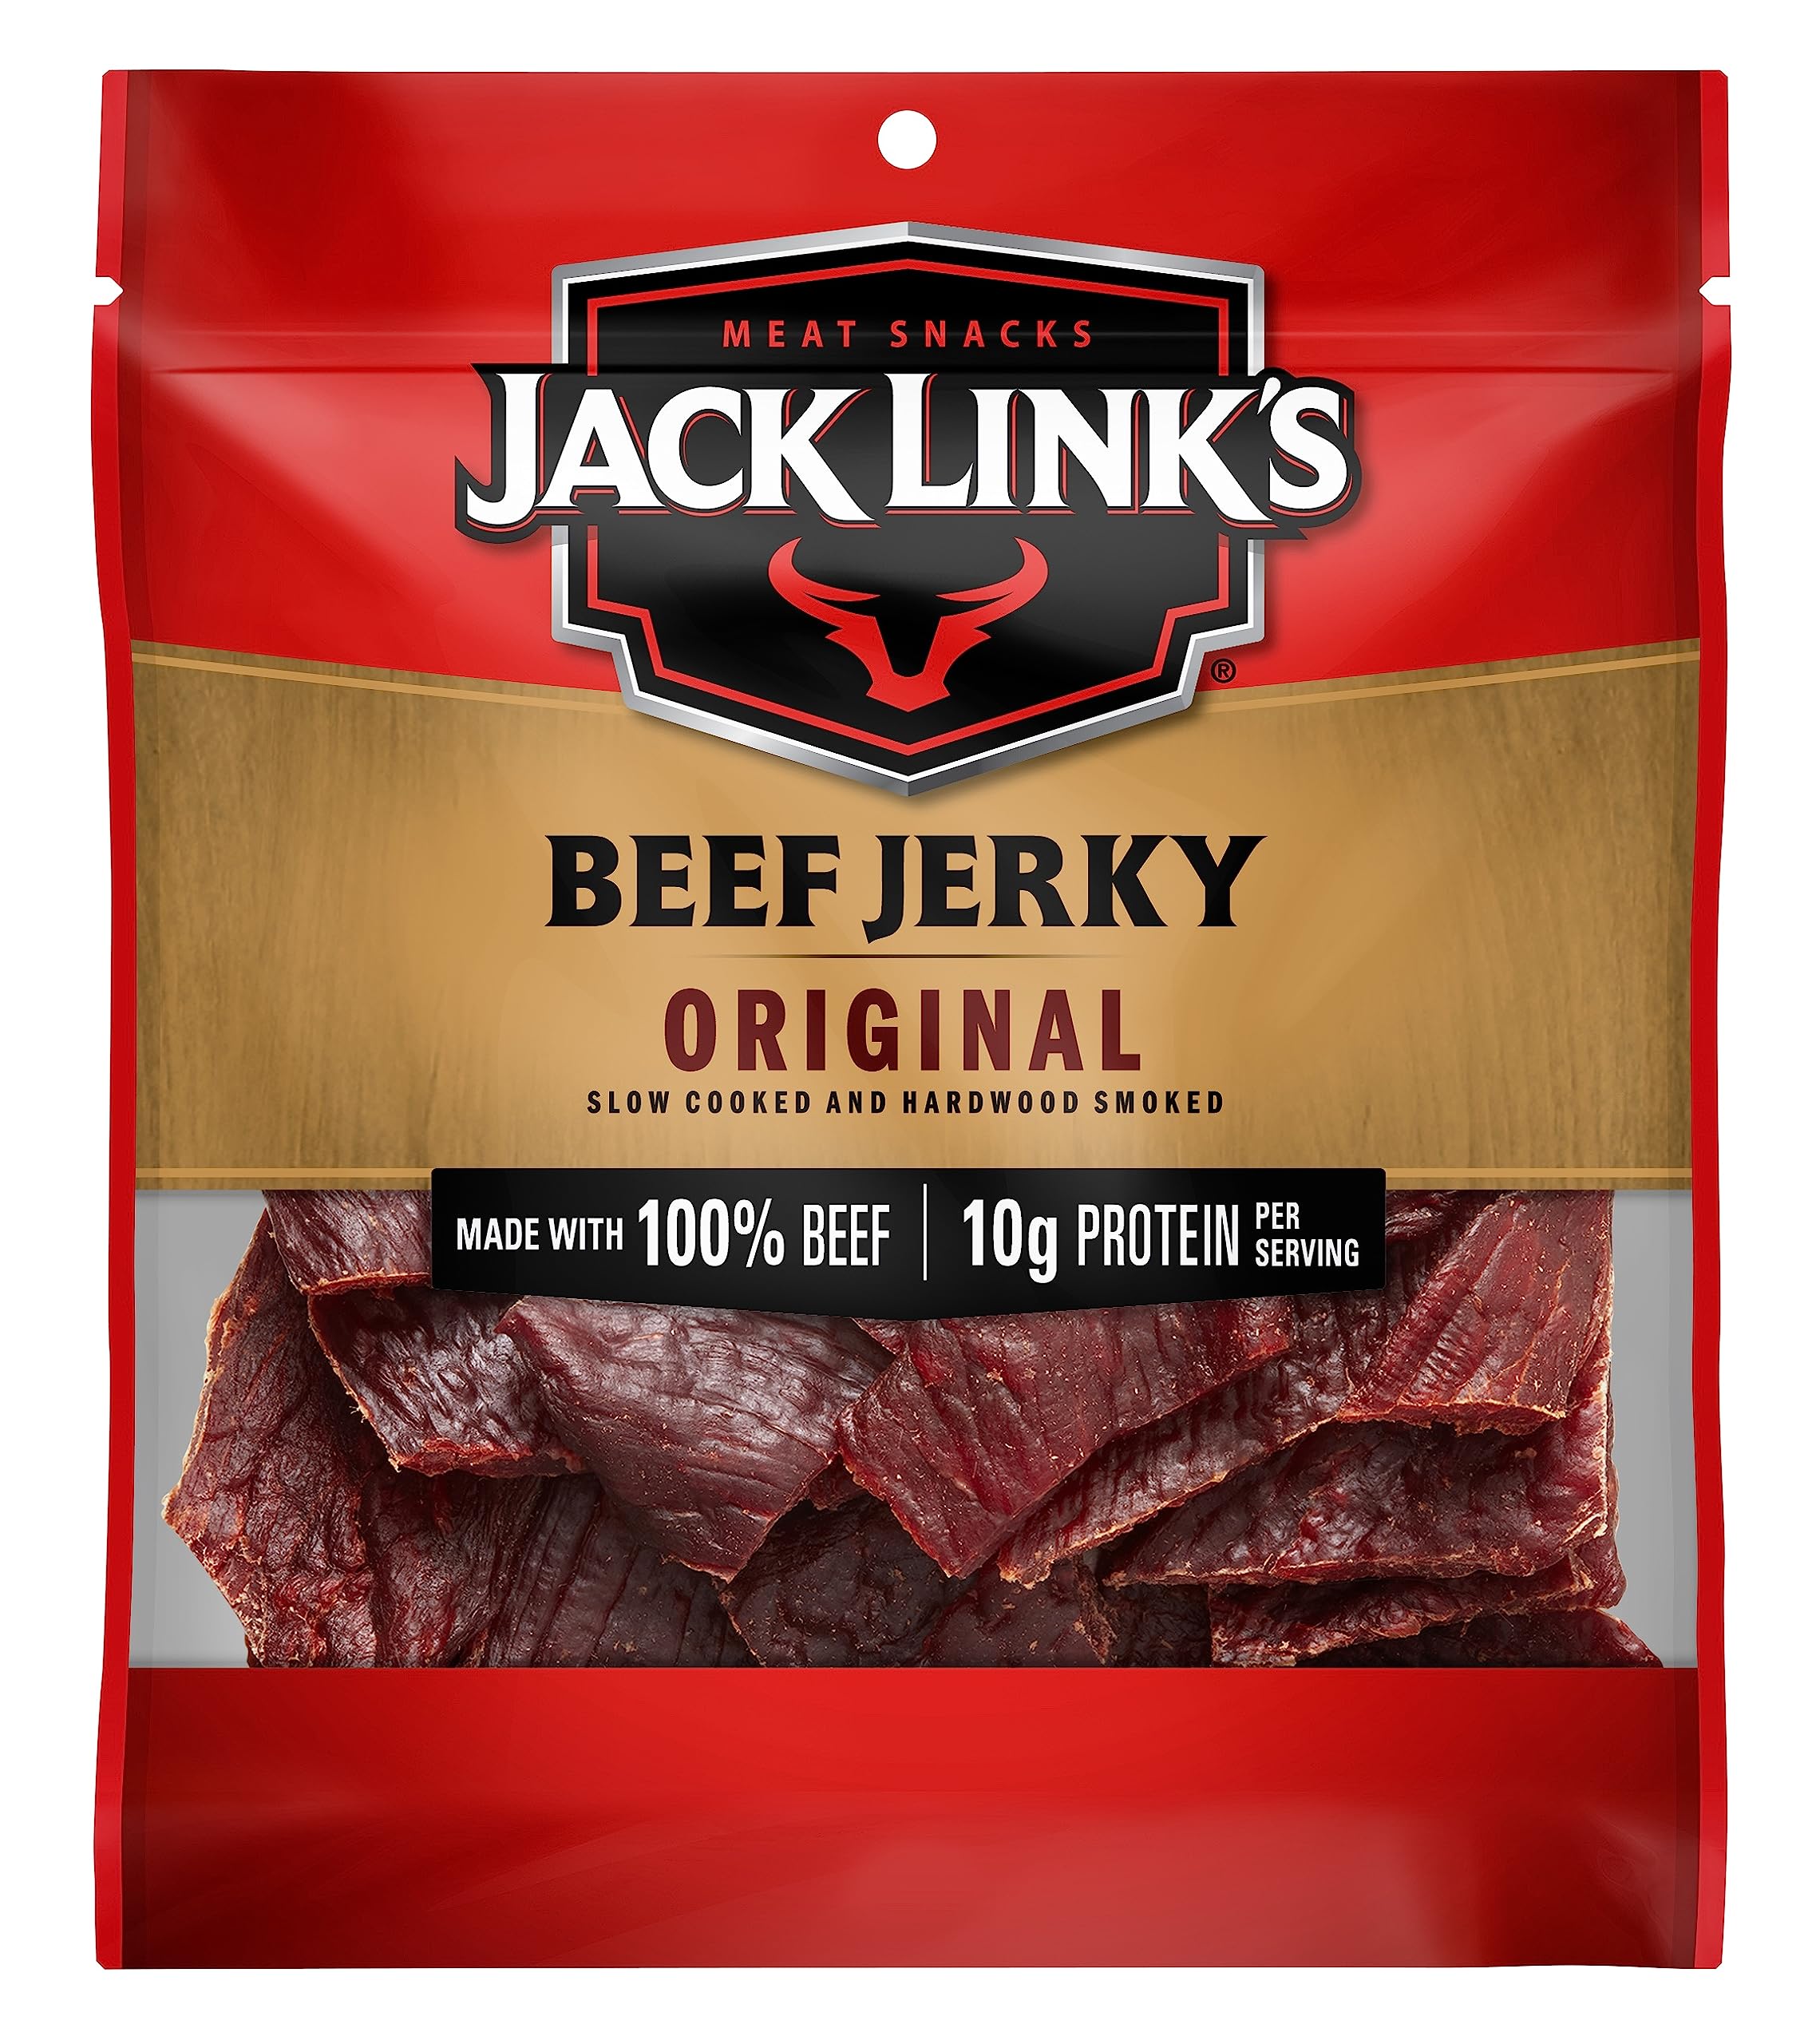 2.6-Ounce Jack Link's Beef Jerky (Original Flavor, Teriyaki) $2.72 w/ S&S, 2.85-Ounce Jack Link's Beef Jerky (Jalapeno) $2.98 w/ S&S + Free Shipping w/ Prime or on $35+